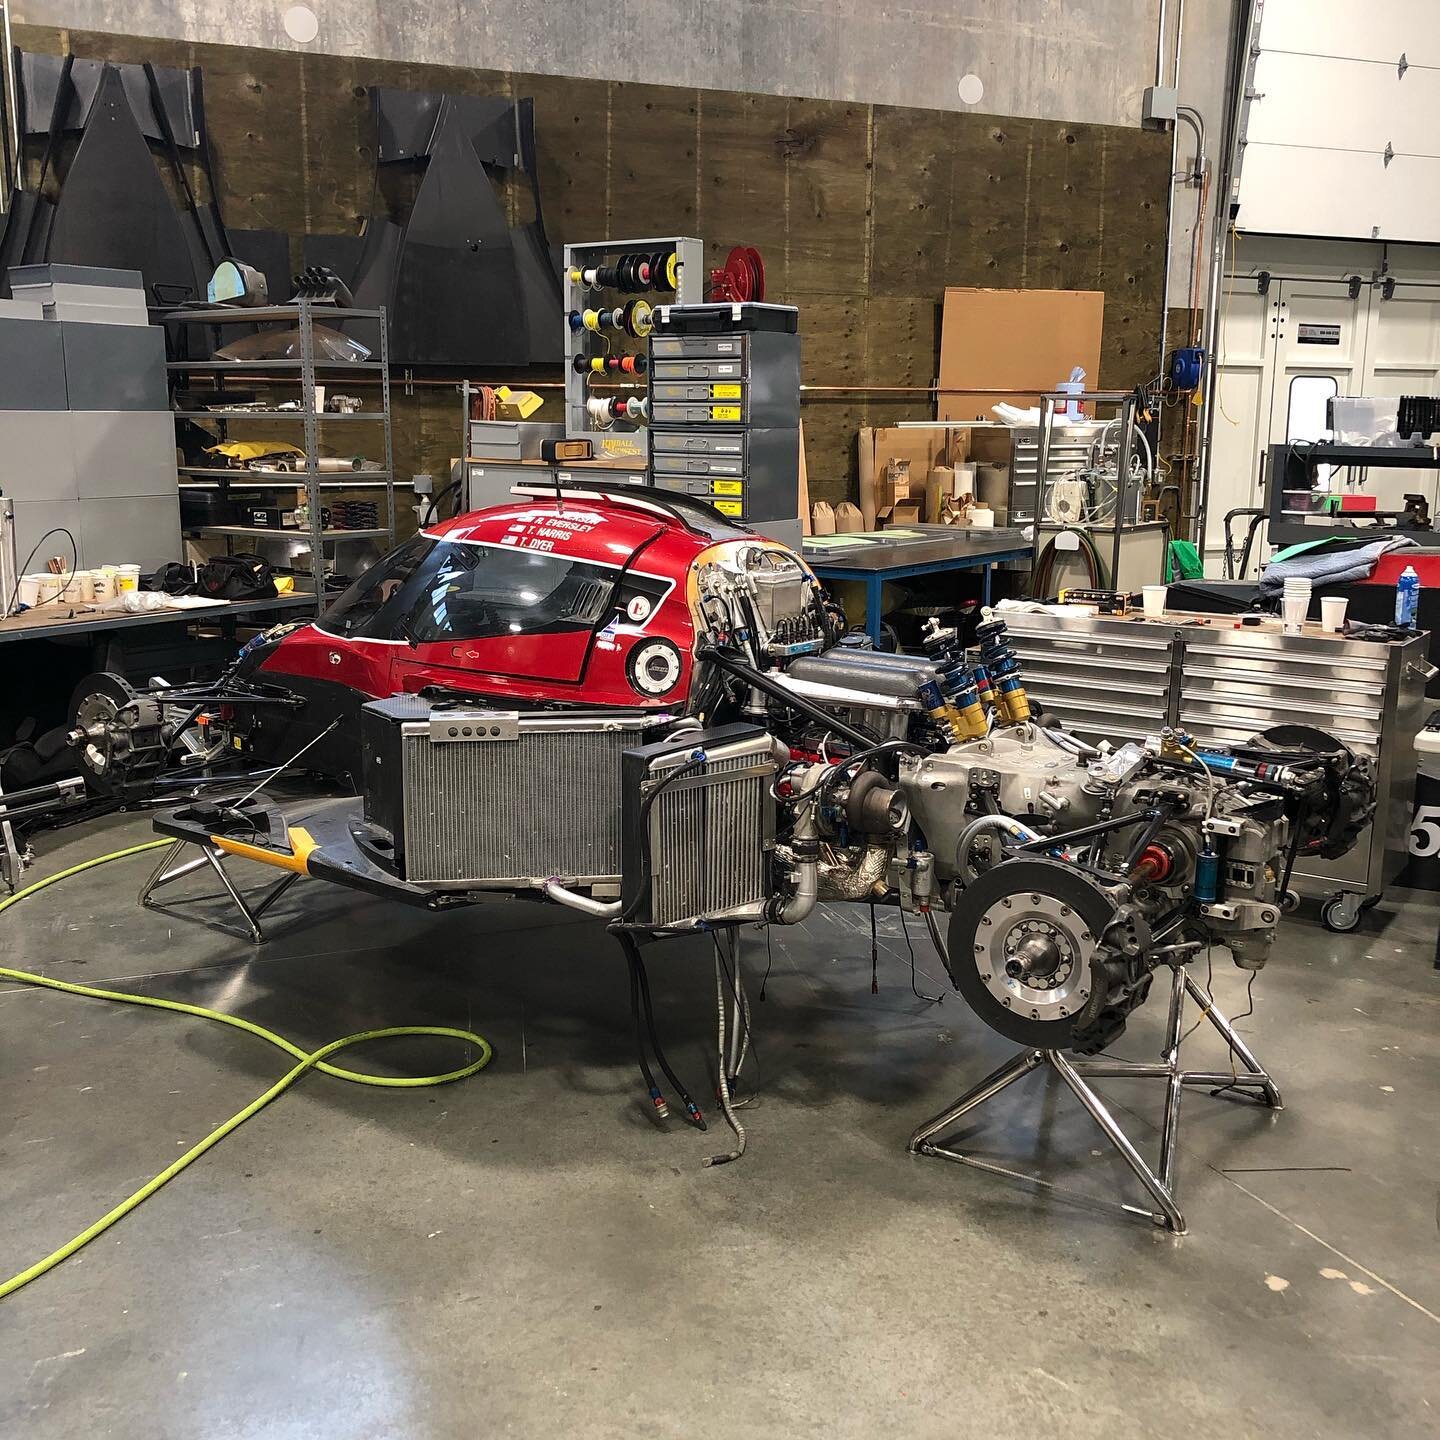 Look what has 4 wheels again!! We haven&rsquo;t fully reassembled this car since BEFORE the 2019 Thunderhill race... Very excited to see it in one piece. Perhaps some sound bits will come your way soon!

&mdash;&mdash;&mdash;&mdash;&mdash;&mdash;&mda